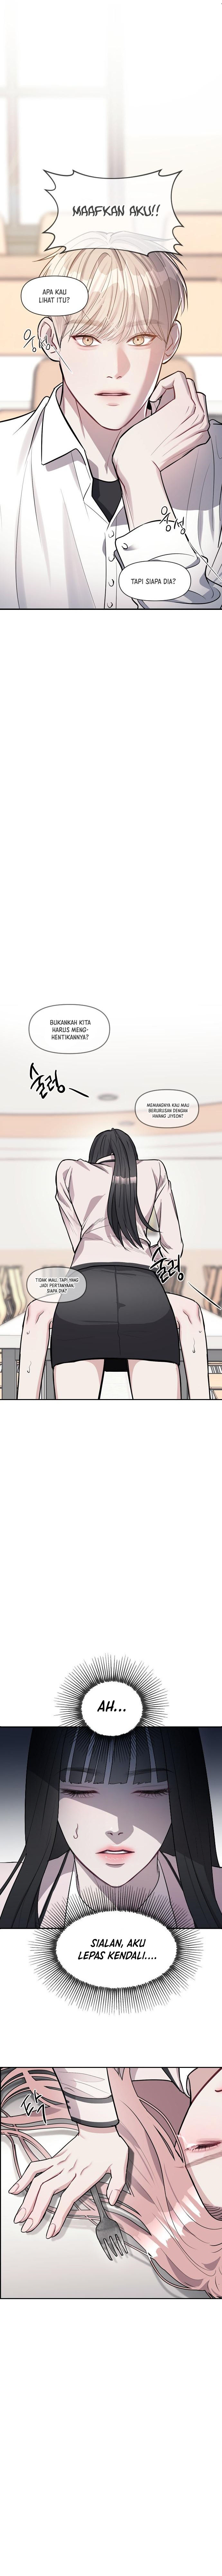 Undercover! Chaebol High School Chapter 01